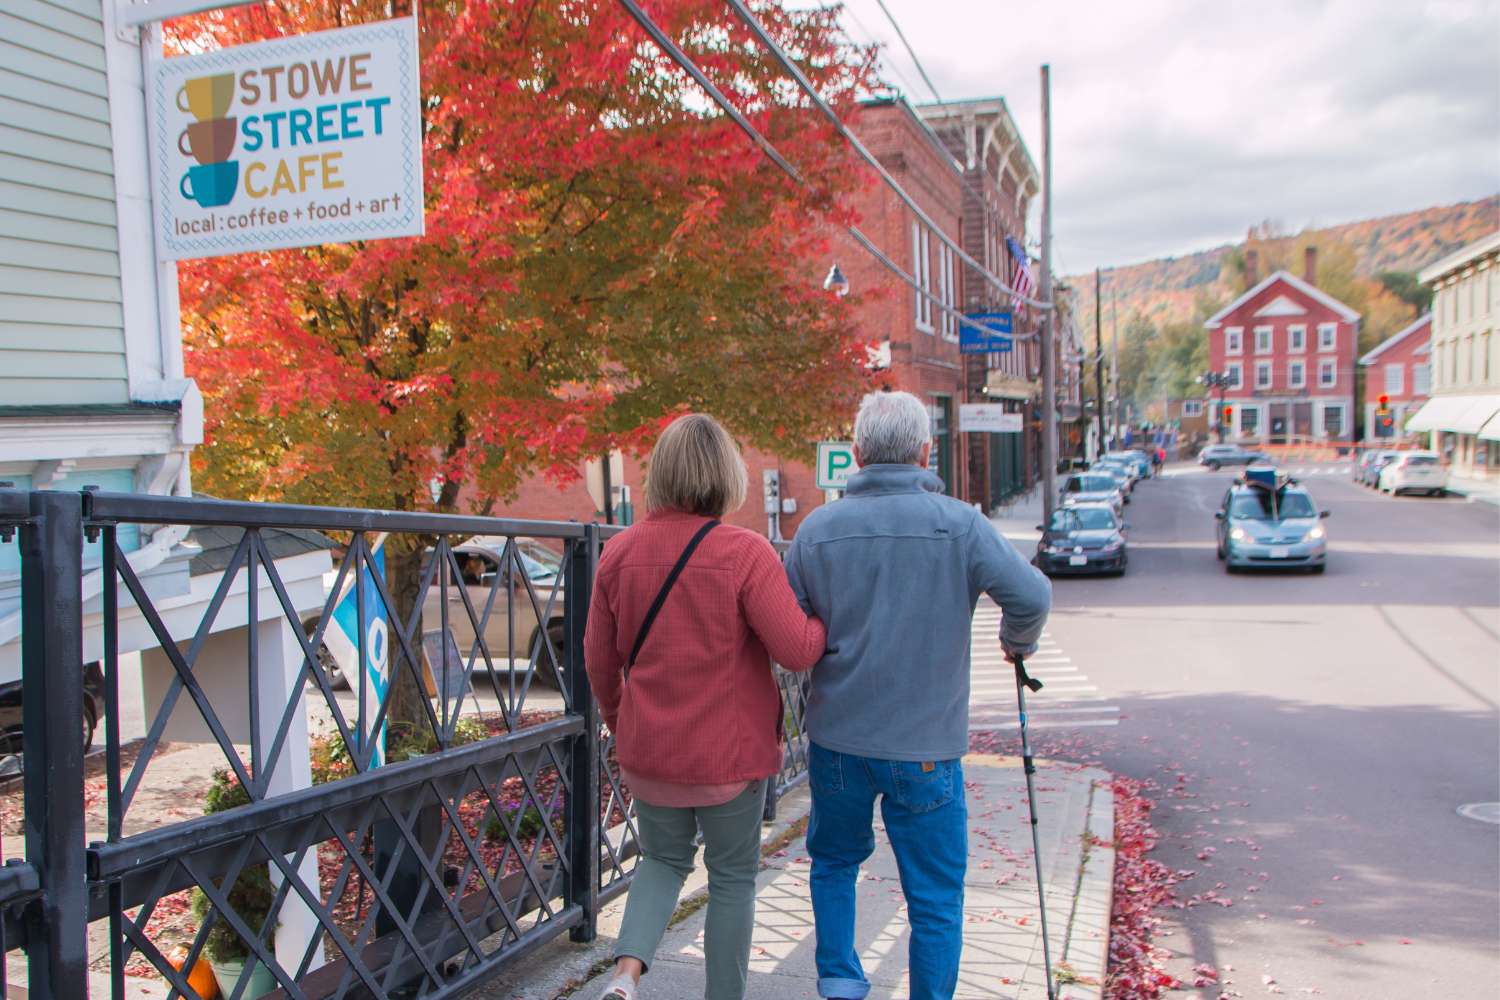 Individuals walking along Stowe Street with historic buildings nearby